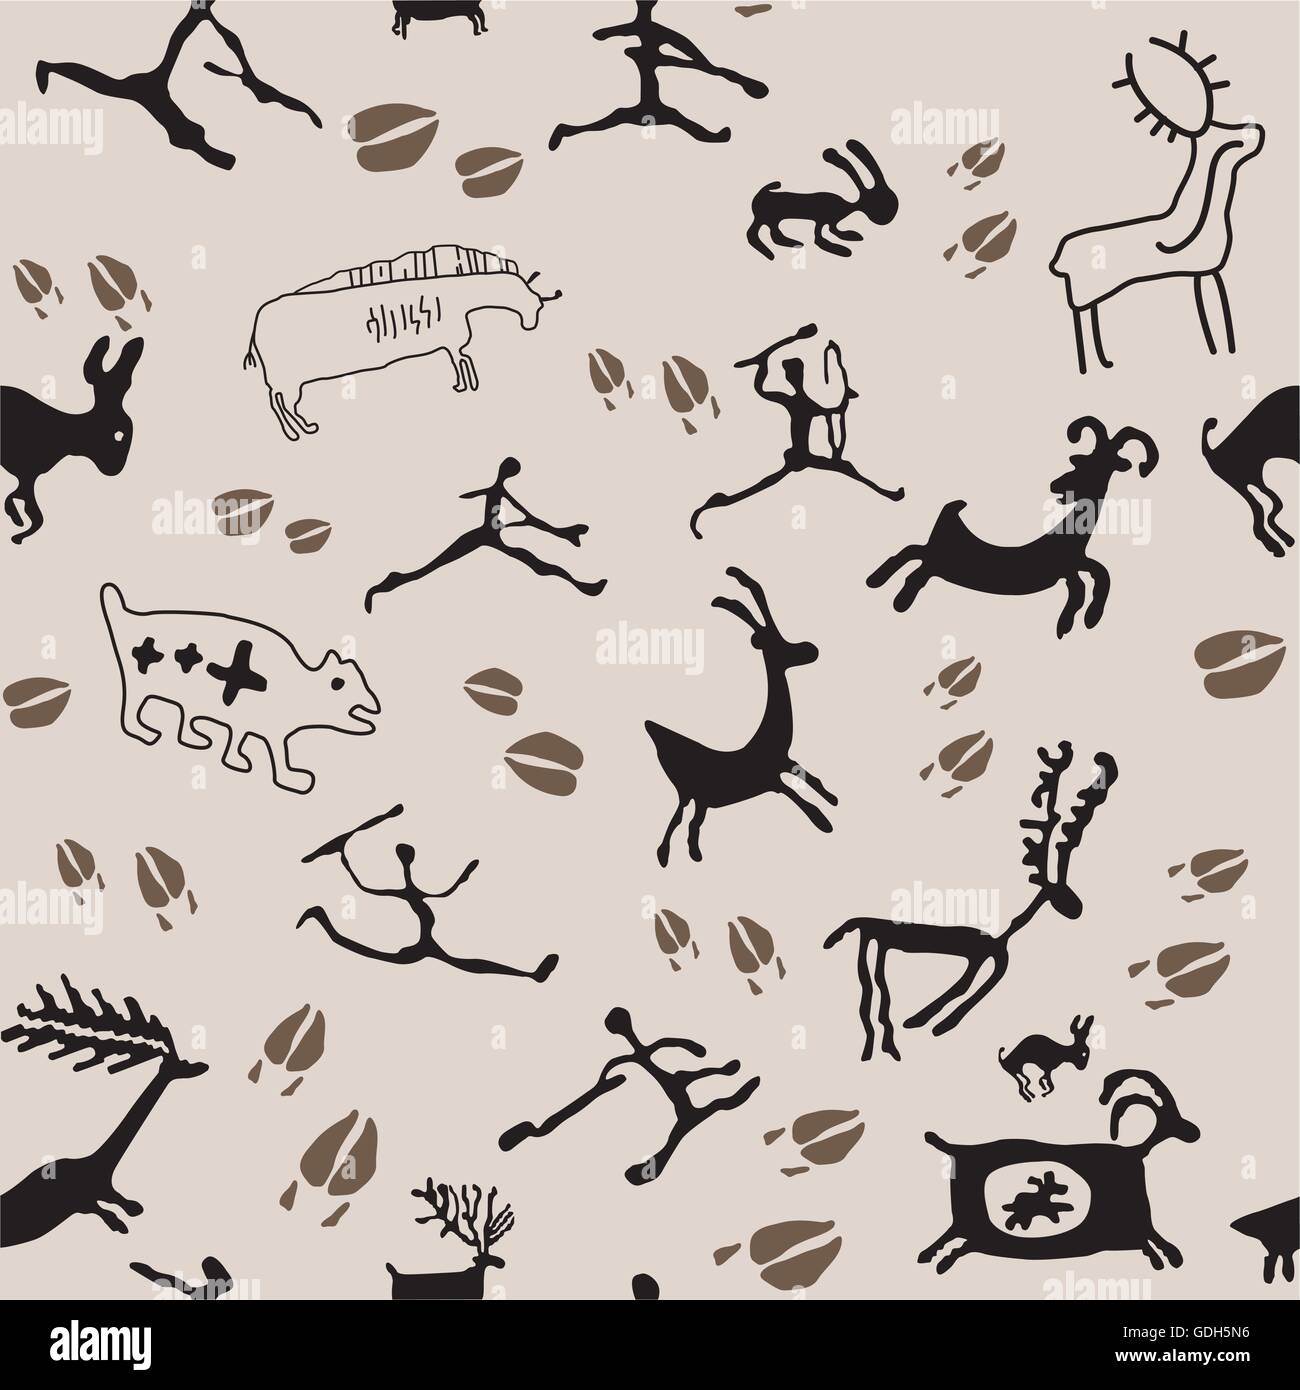 Premium Vector  A series of petroglyphs cave drawings seamless pattern